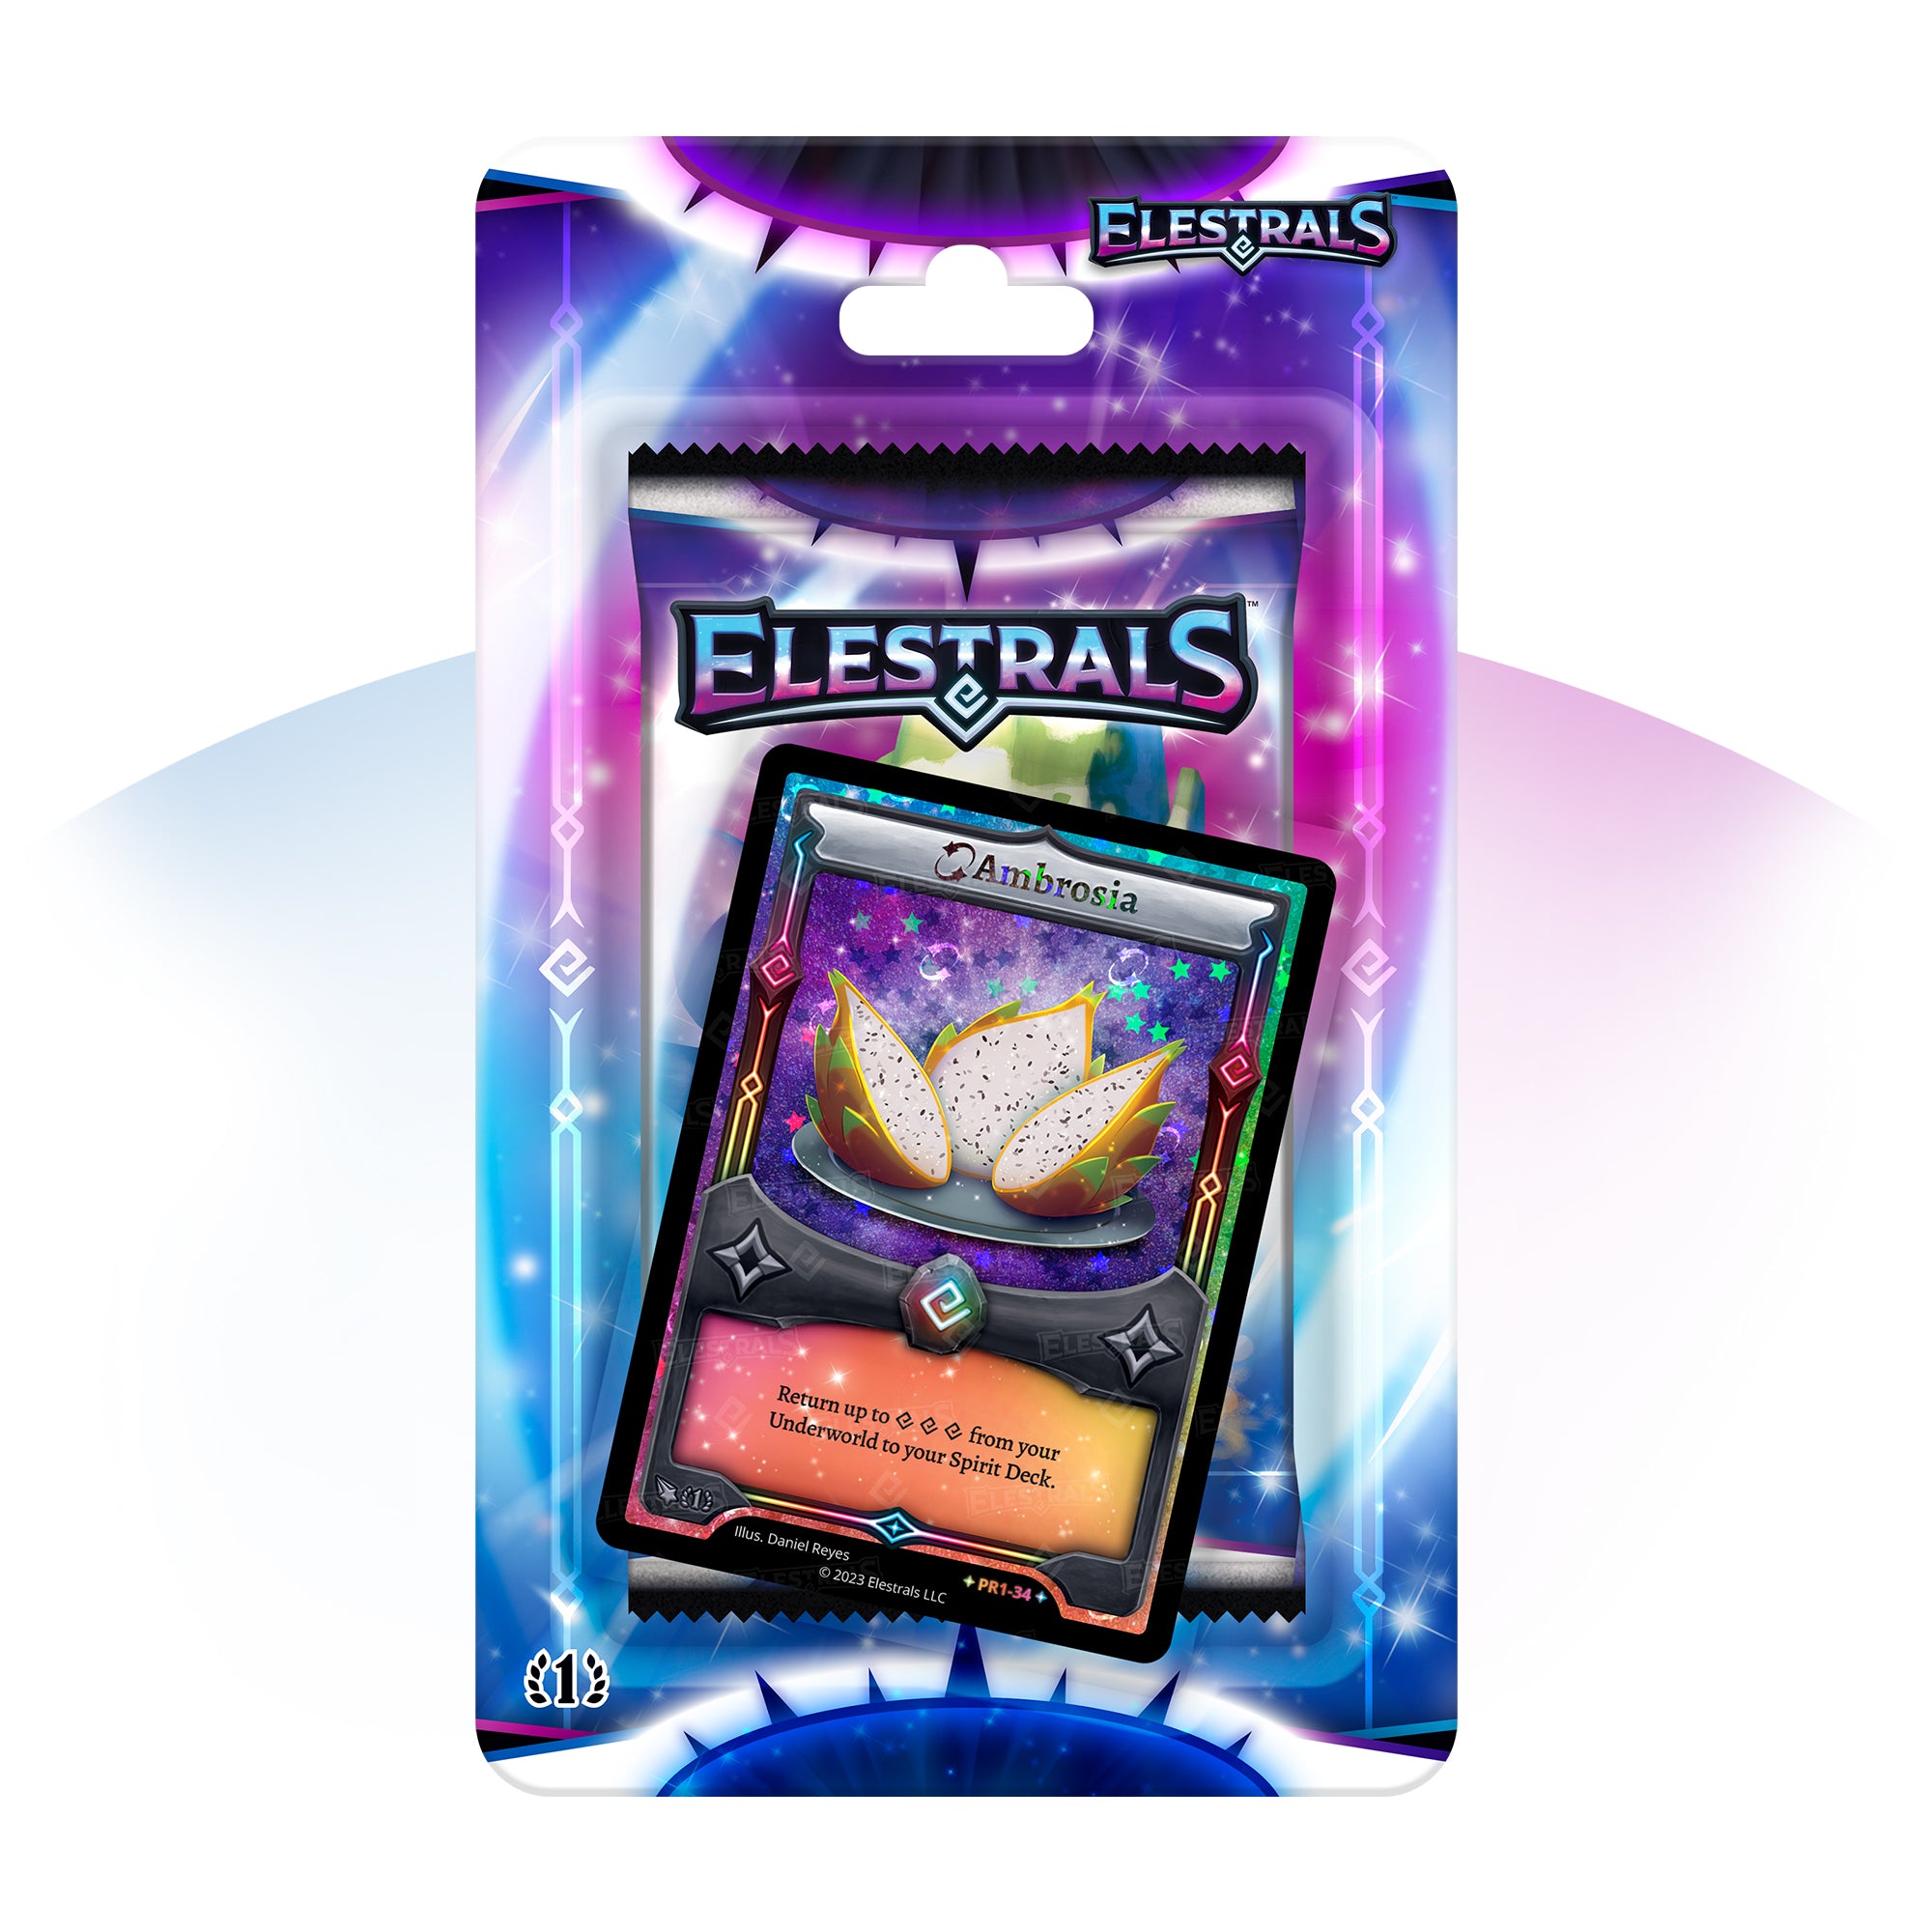 Base Set Blister Pack with Stellar Ambrosia - 1st Edition